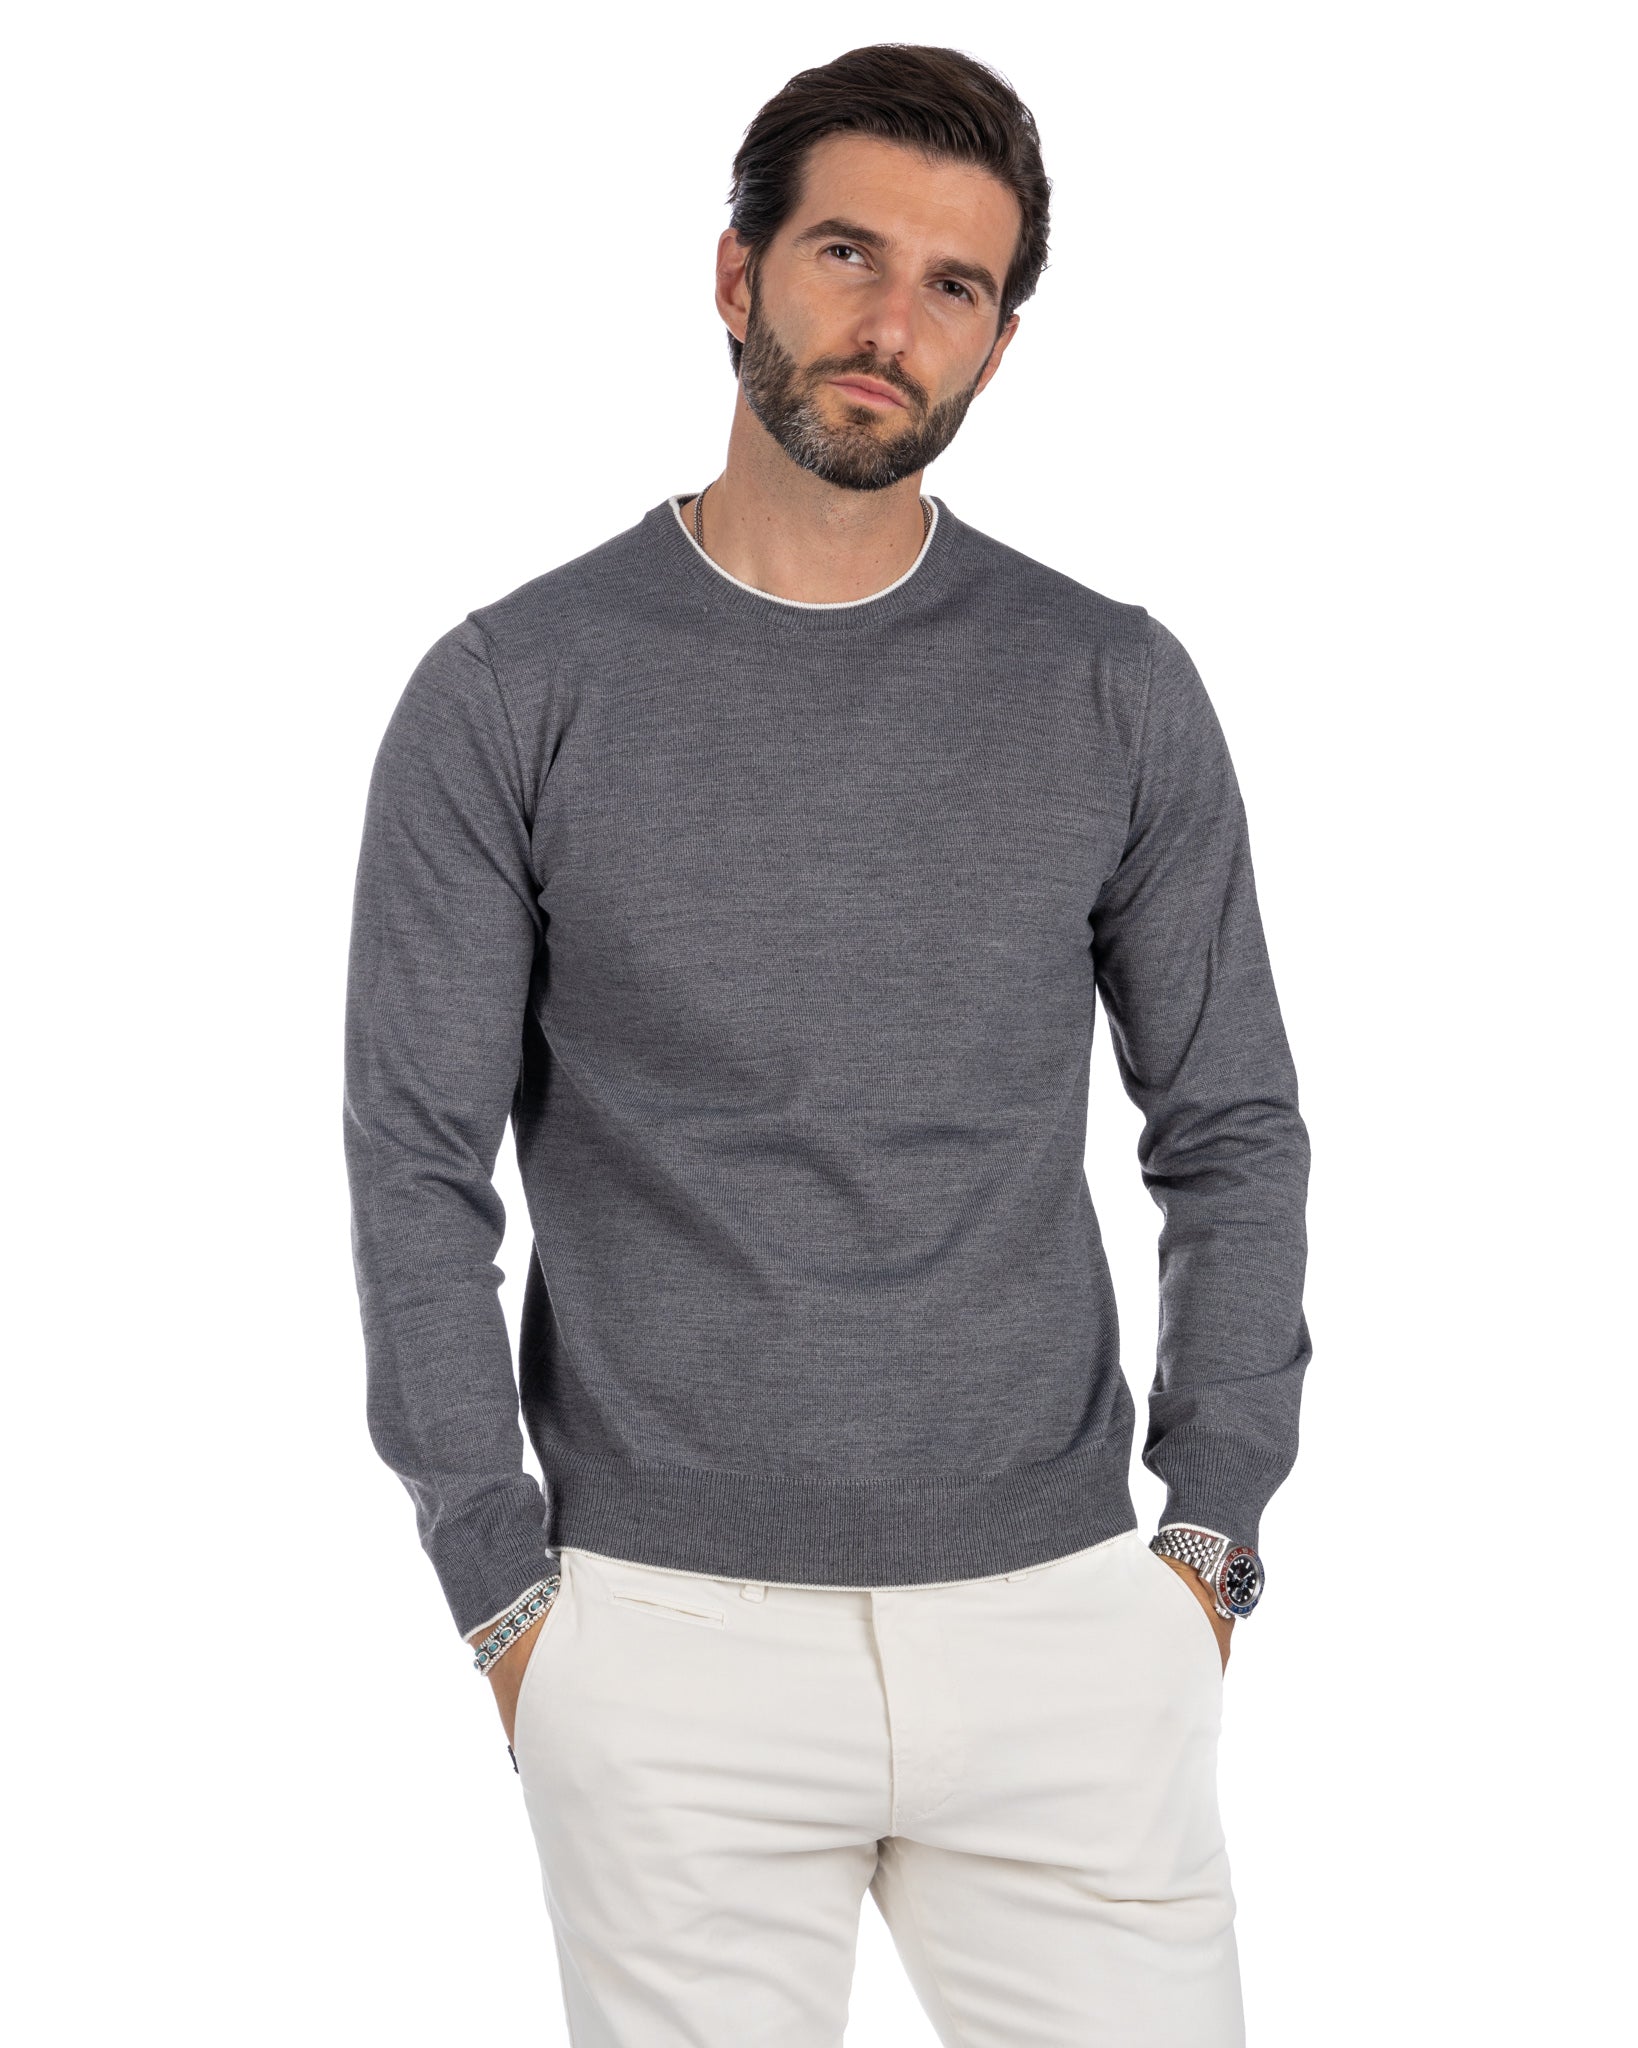 Seve - gray sweater with white border